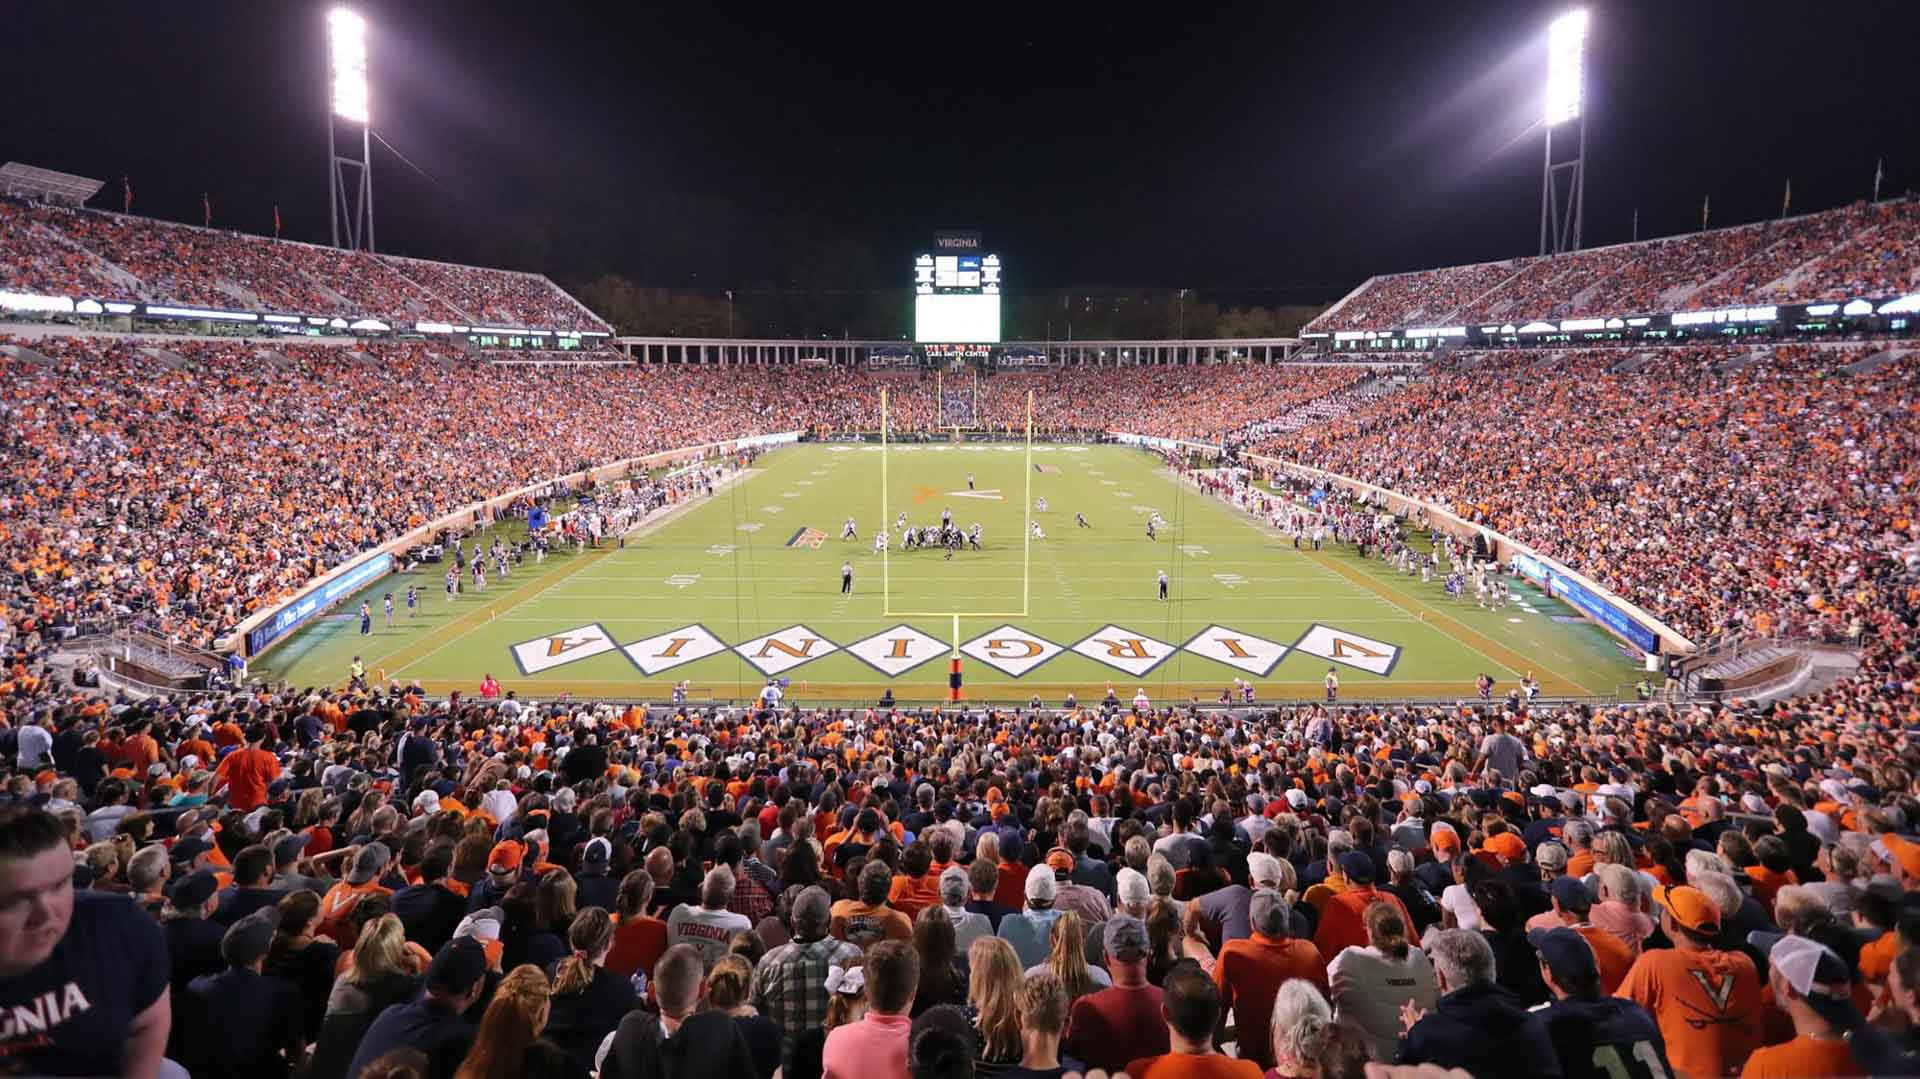 Scott Stadium filled with fans watching a game